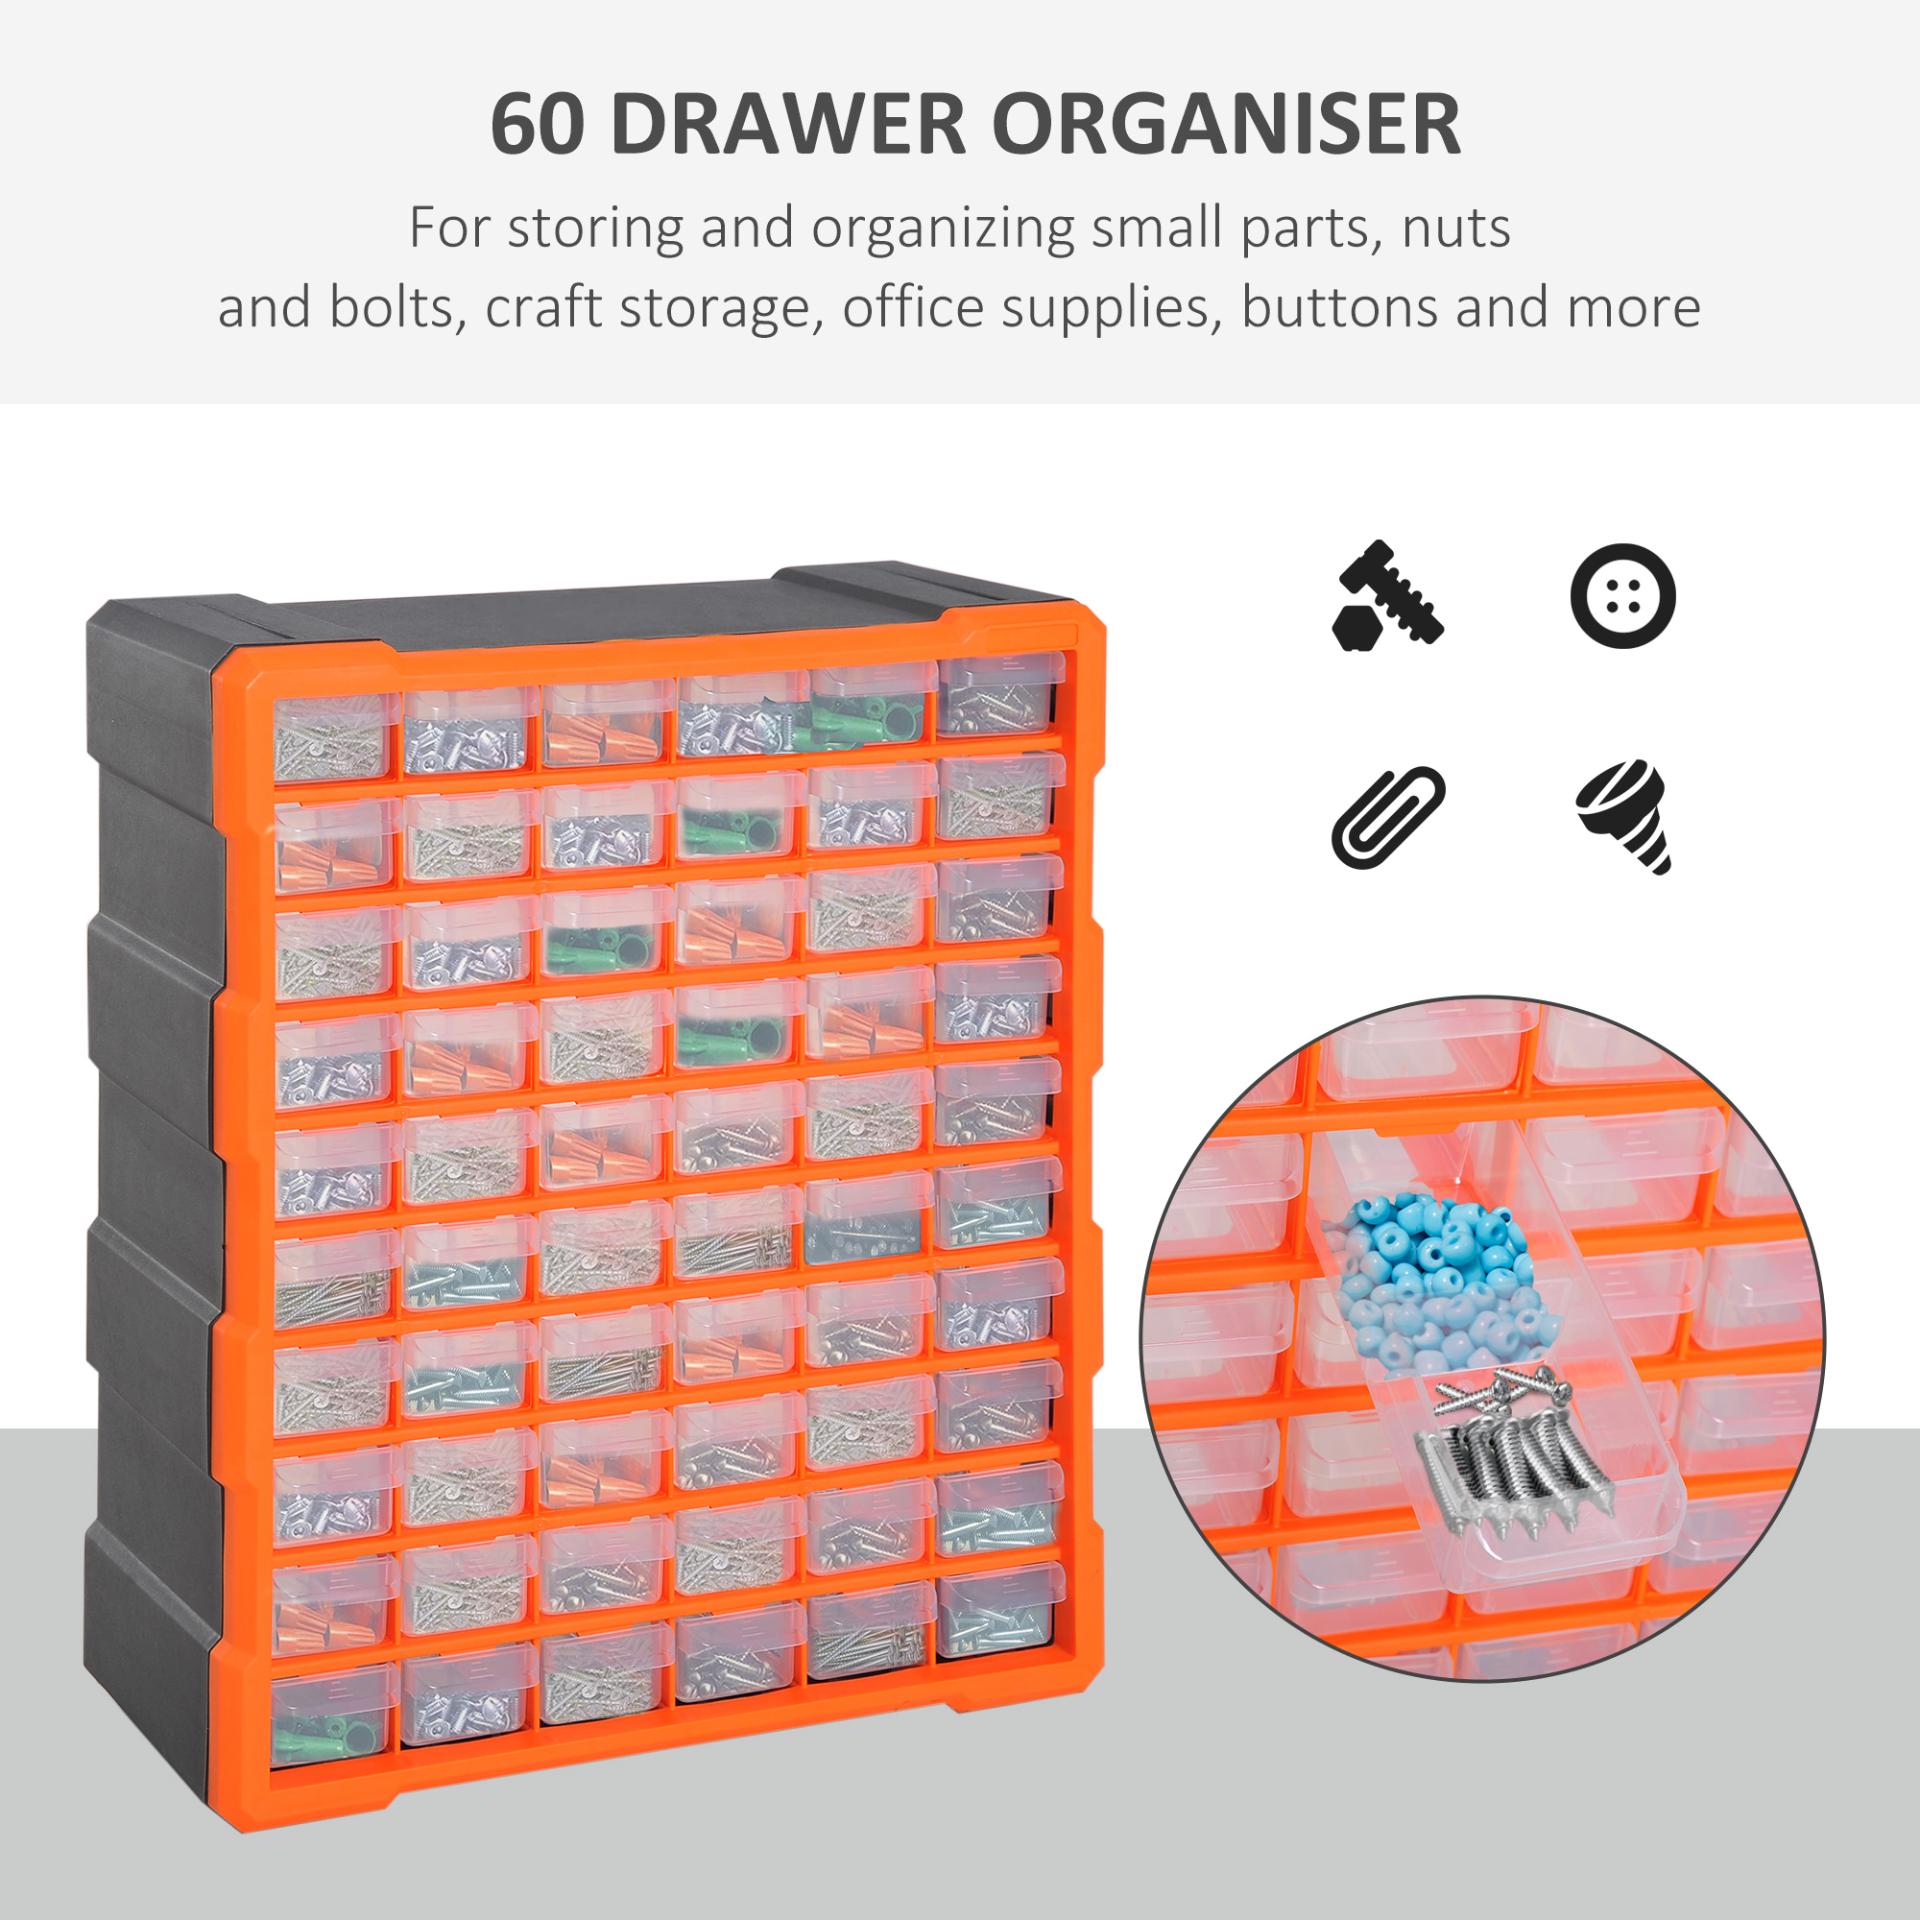 DURHAND 60 Drawers Parts Organiser Wall Mount Storage Cabinet Garage Small Nuts Bolts Tools Clear Orange